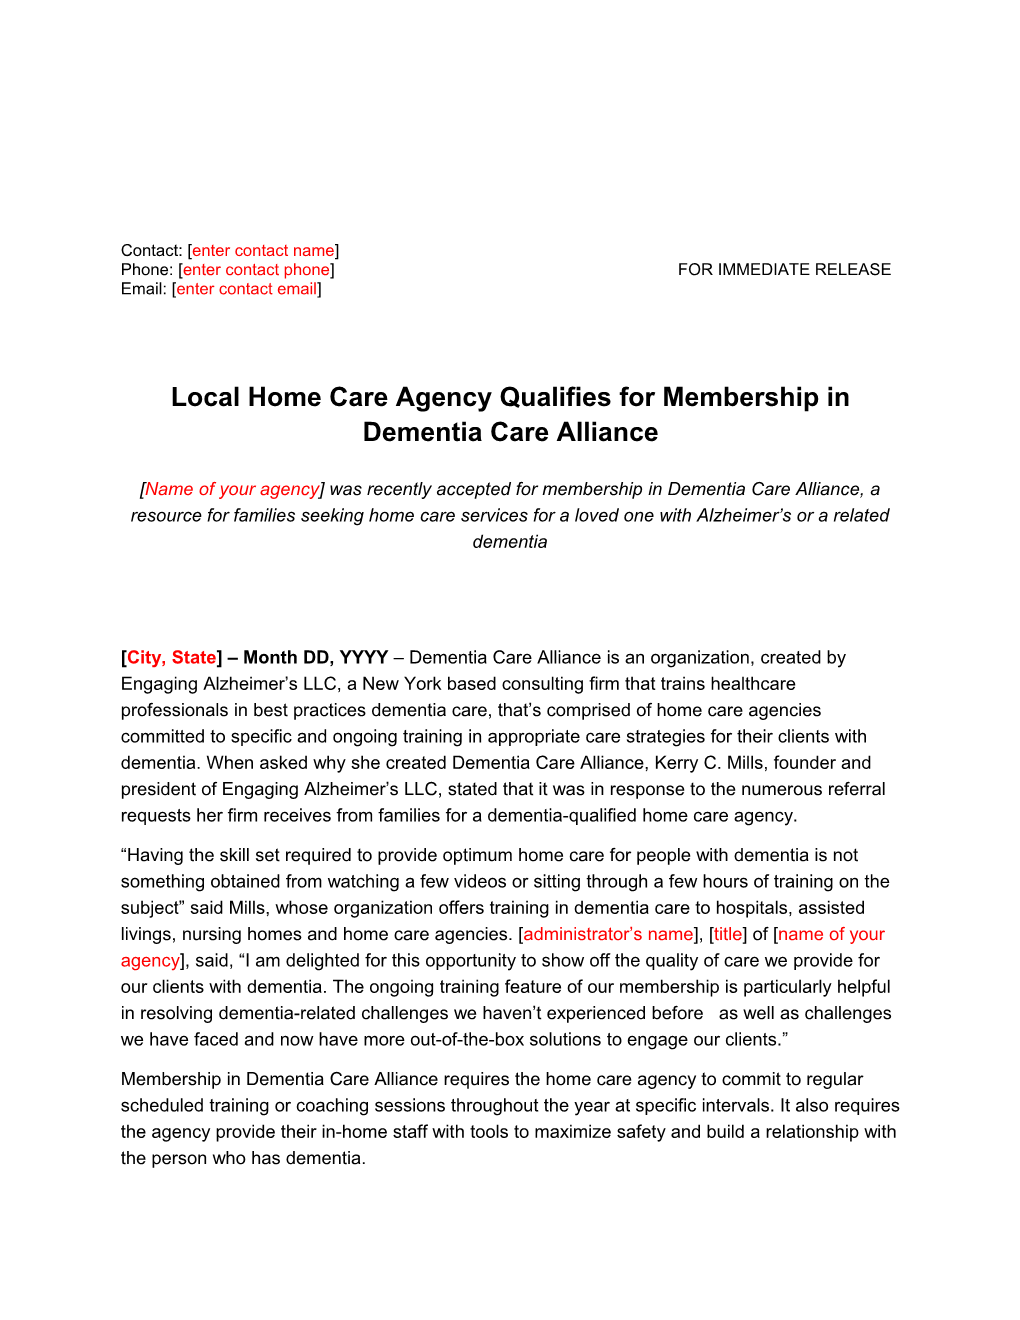 Local Home Care Agency Qualifies for Membership in Dementia Care Alliance